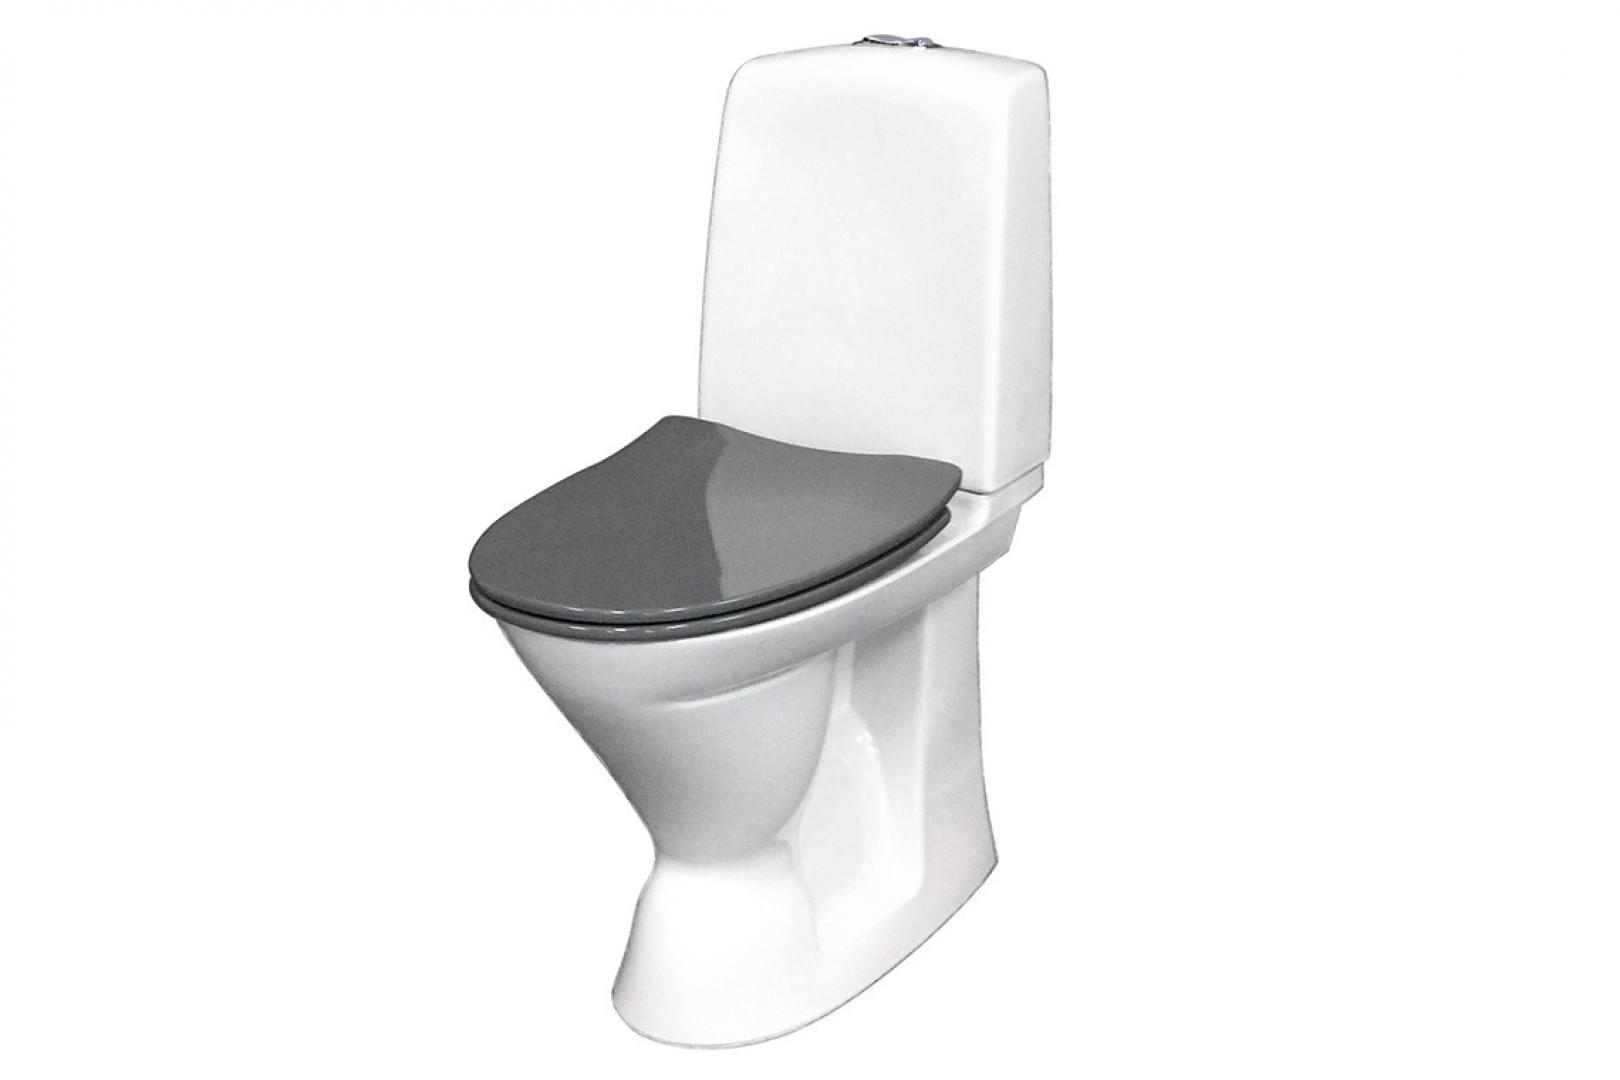 Ifo Spira Toilet Kit – AS1428.1 Set Up – S Trap - CARE6261 from Enware